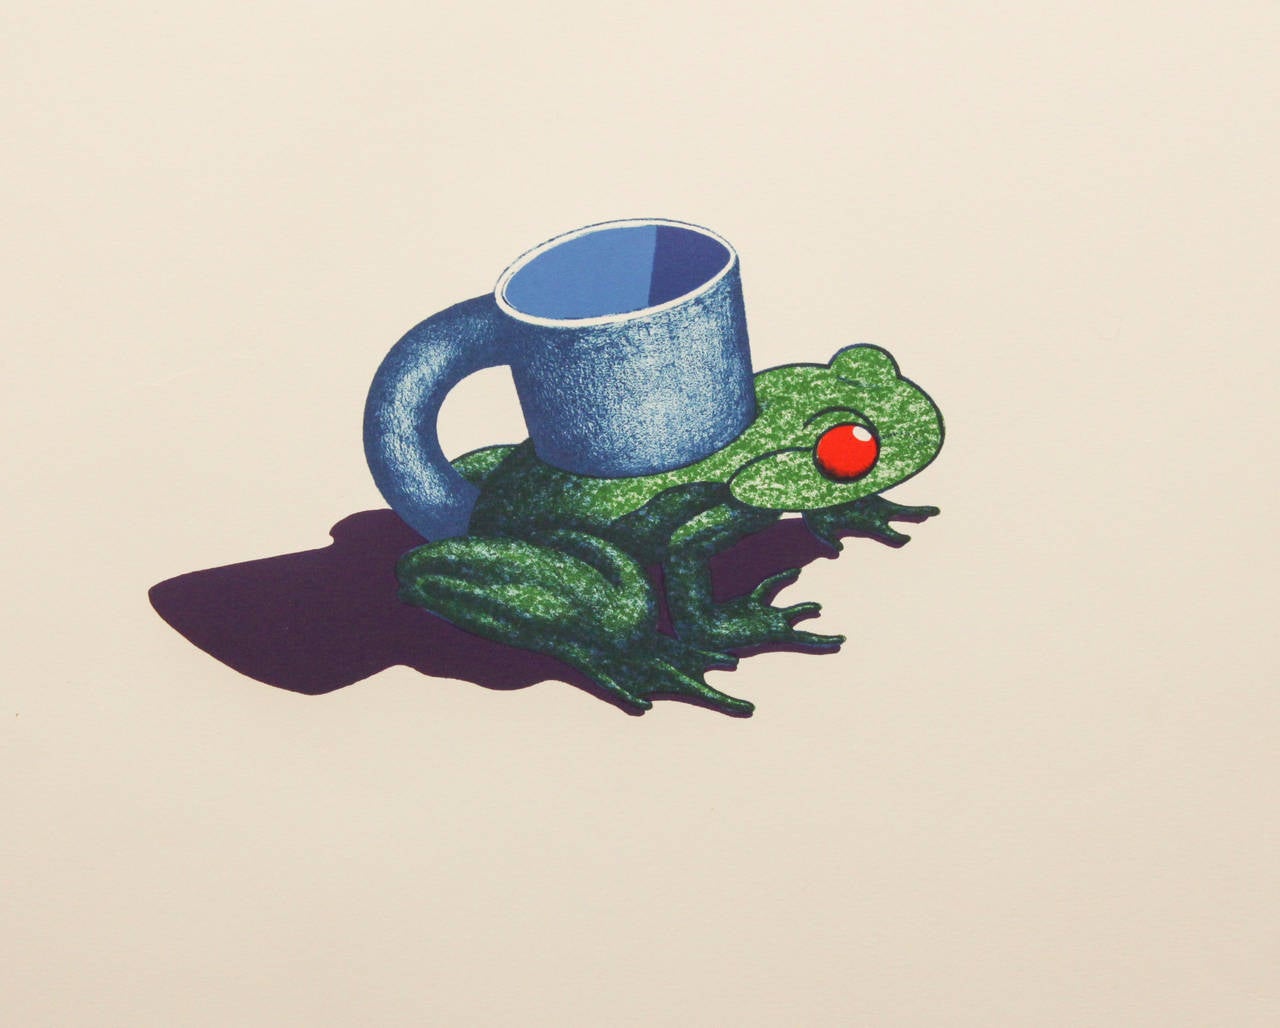 Frog Cup - Print by Ken Price